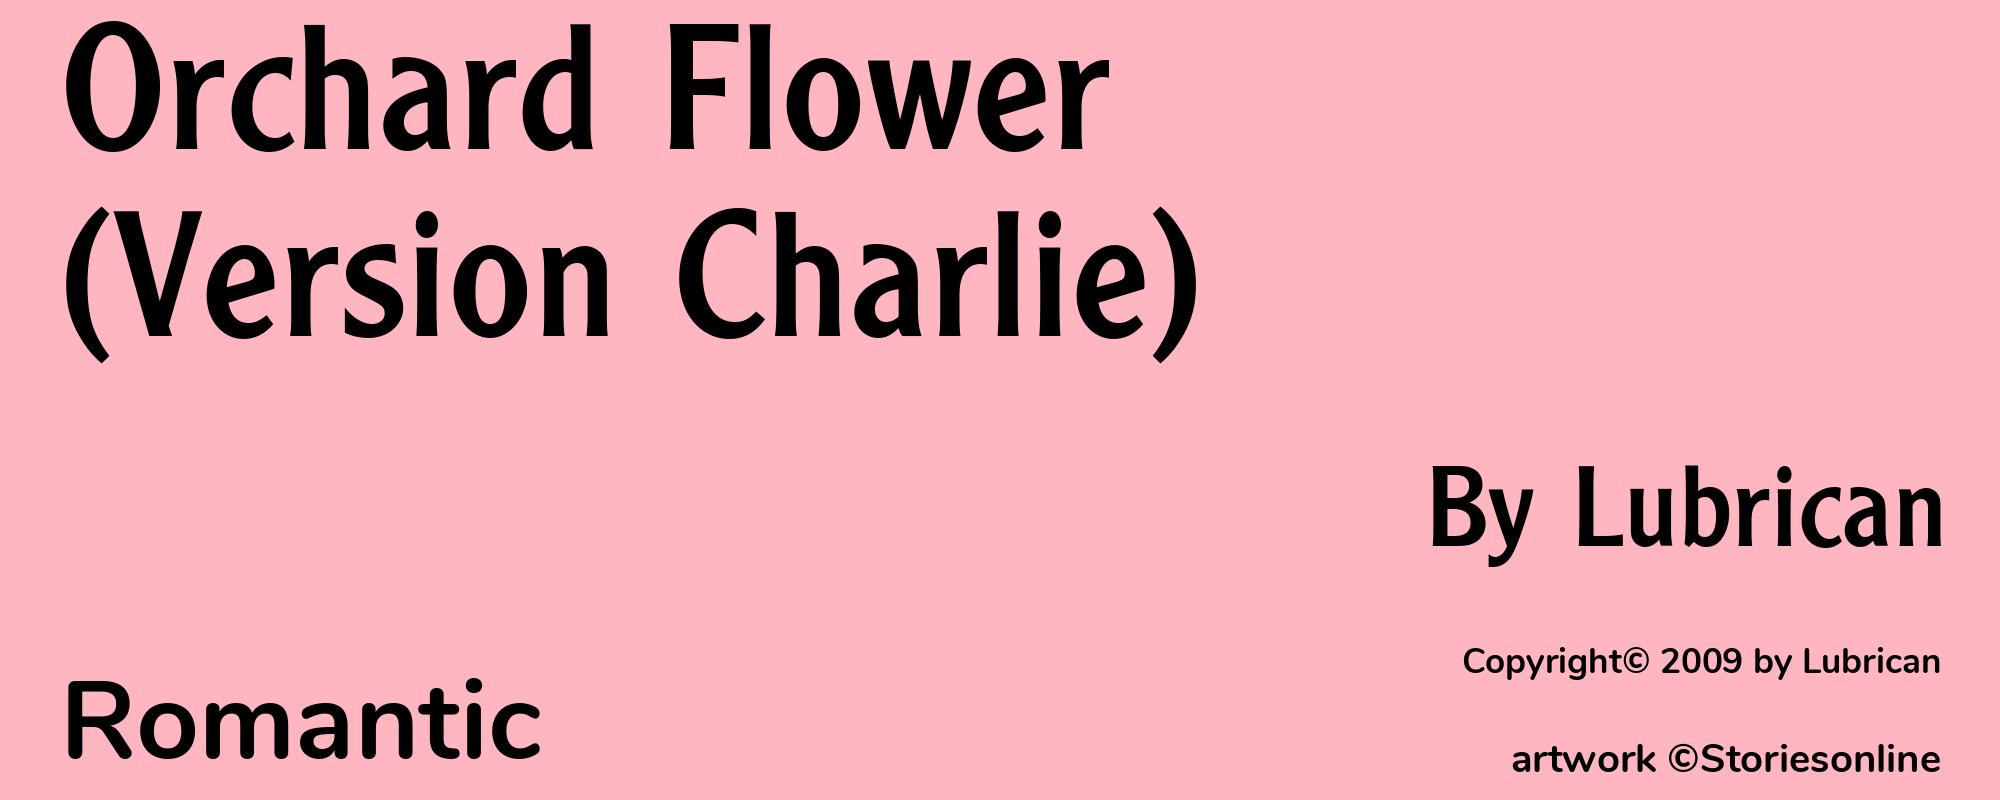 Orchard Flower (Version Charlie) - Cover